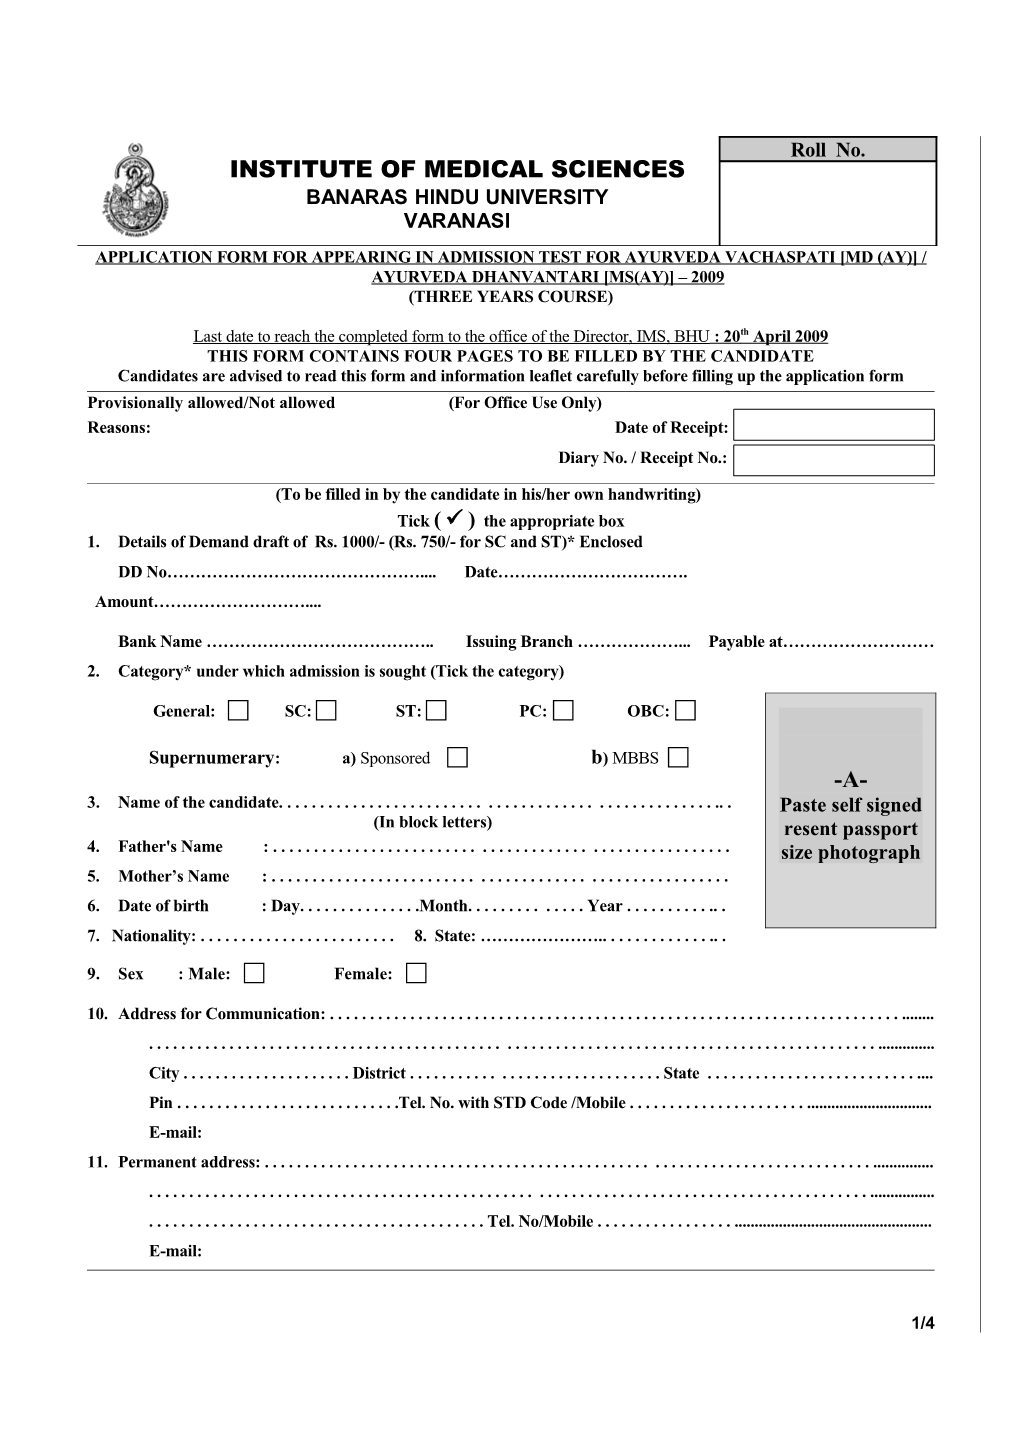 Application Form for Appearing in Admission Test for Ayurveda Vachaspati Md (Ay) / Ayurveda